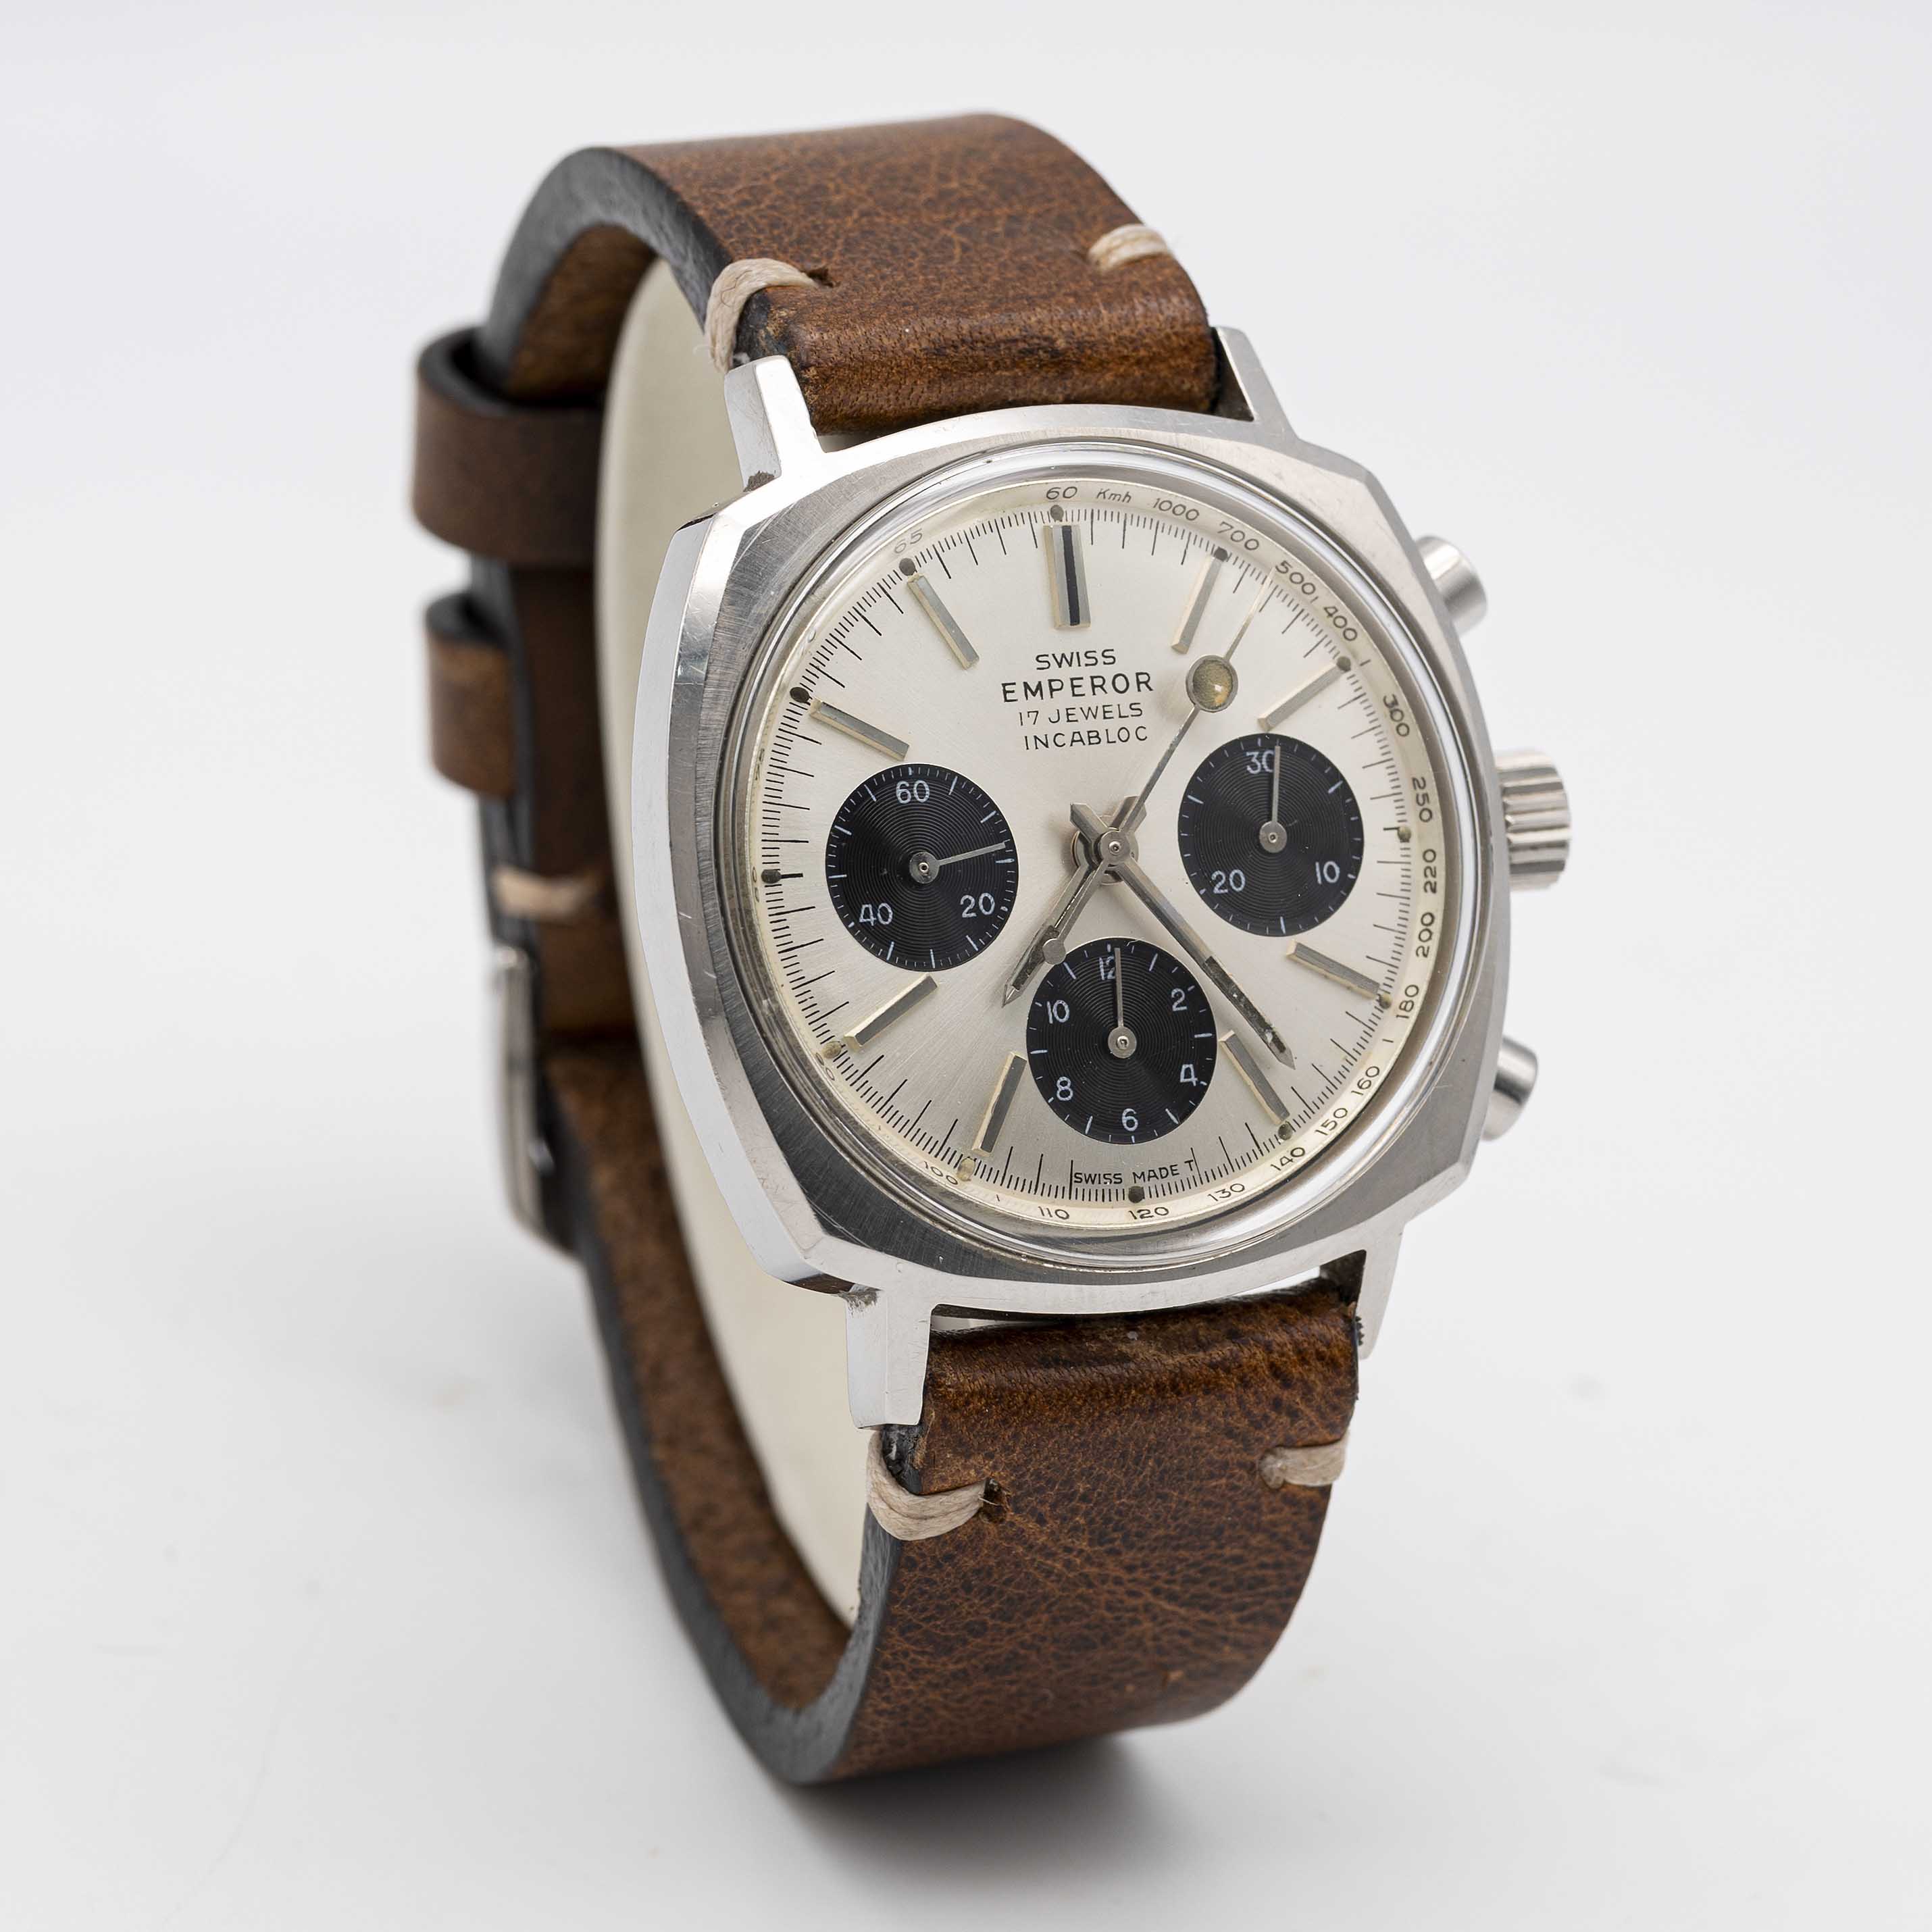 A GENTLEMAN'S STAINLESS STEEL SWISS EMPEROR CAMARO CHRONOGRAPH WRIST WATCH CIRCA 1970, WITH - Image 4 of 8